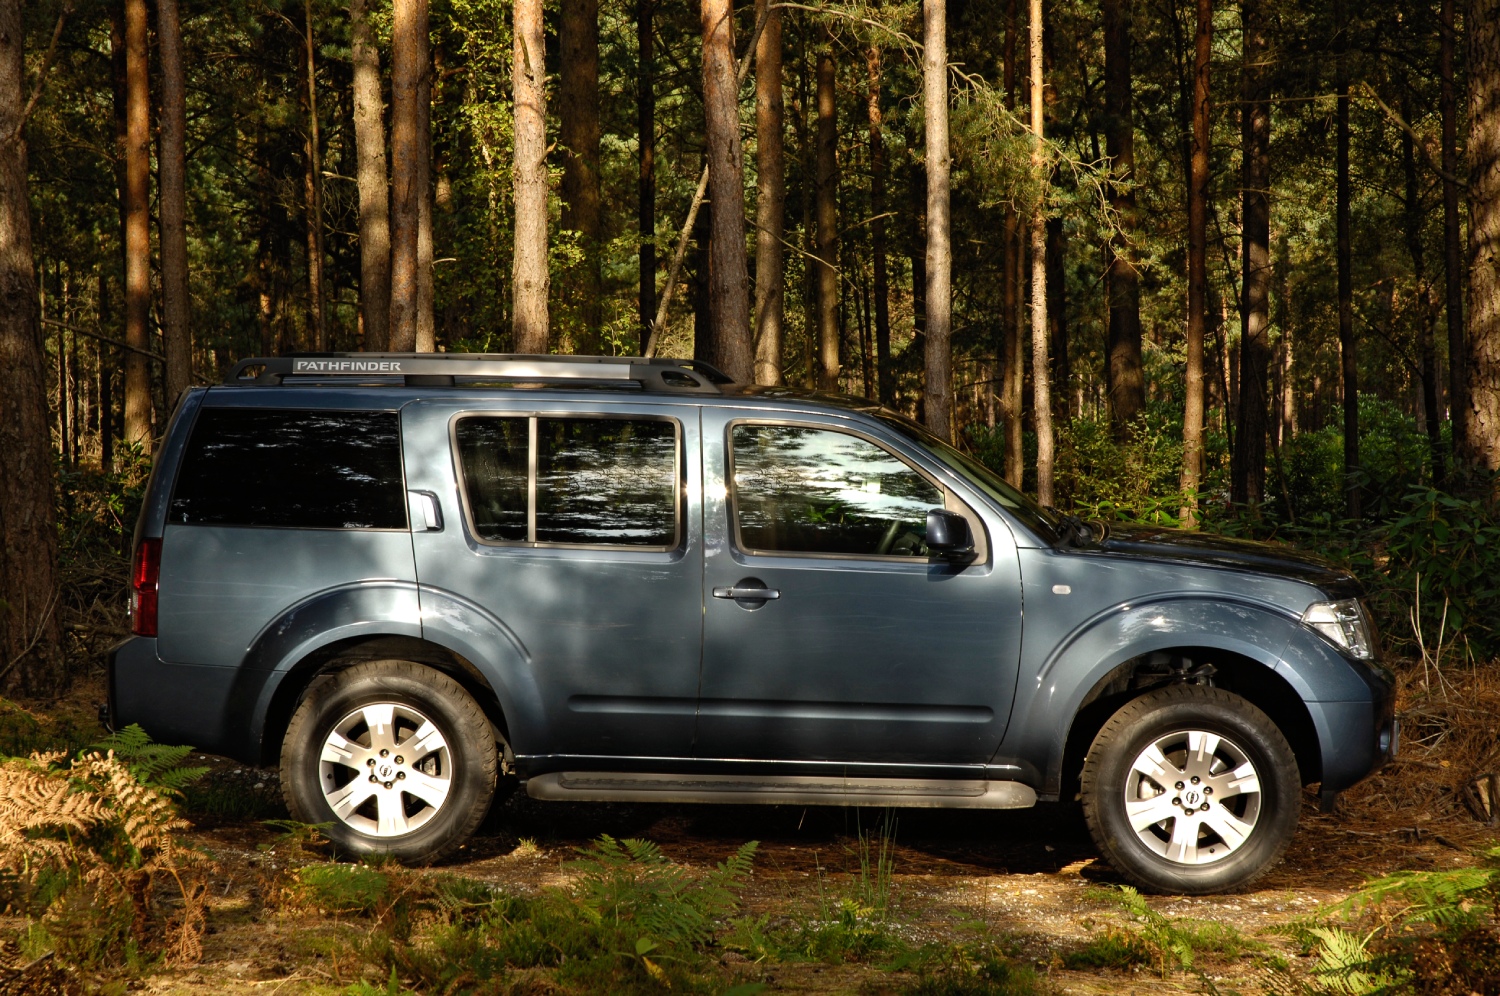 The Nissan Pathfinder is a midsize SUV with the highest five-year depreciation